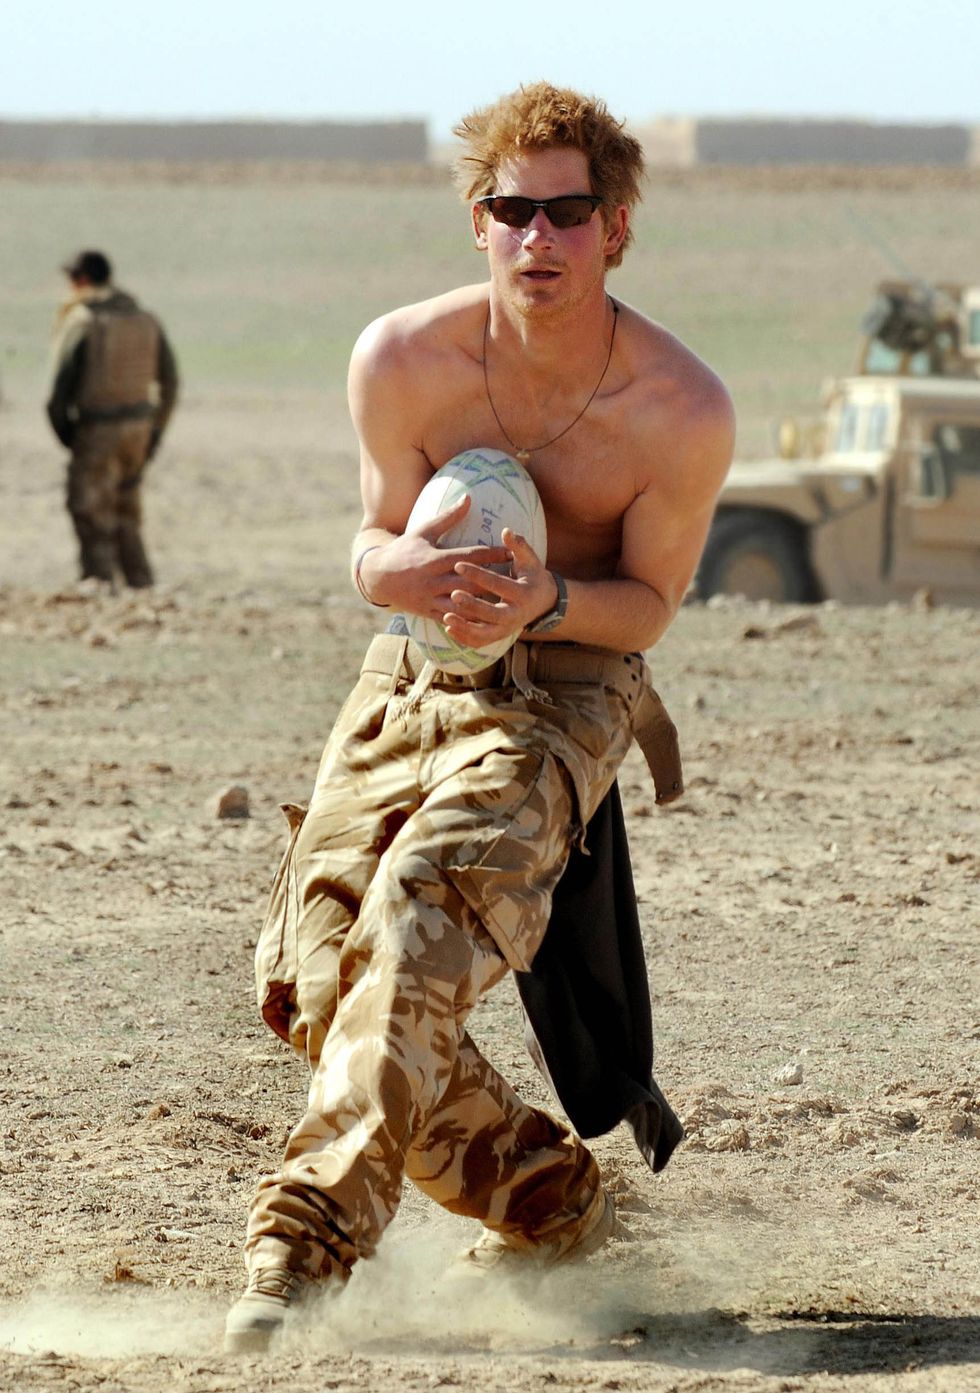 HELMAND PROVINCE, AFGHANISTAN - JANUARY 2: (NO PUBLICATION IN UK MEDIA FOR 28 DAYS) Prince Harry practices his rugby skills during a break in the desert on January 2, 2008 in Helmand Province, Afghanistan. (Photo by John Stillwell - POOL/Anwar Hussein Collection/WireImage)